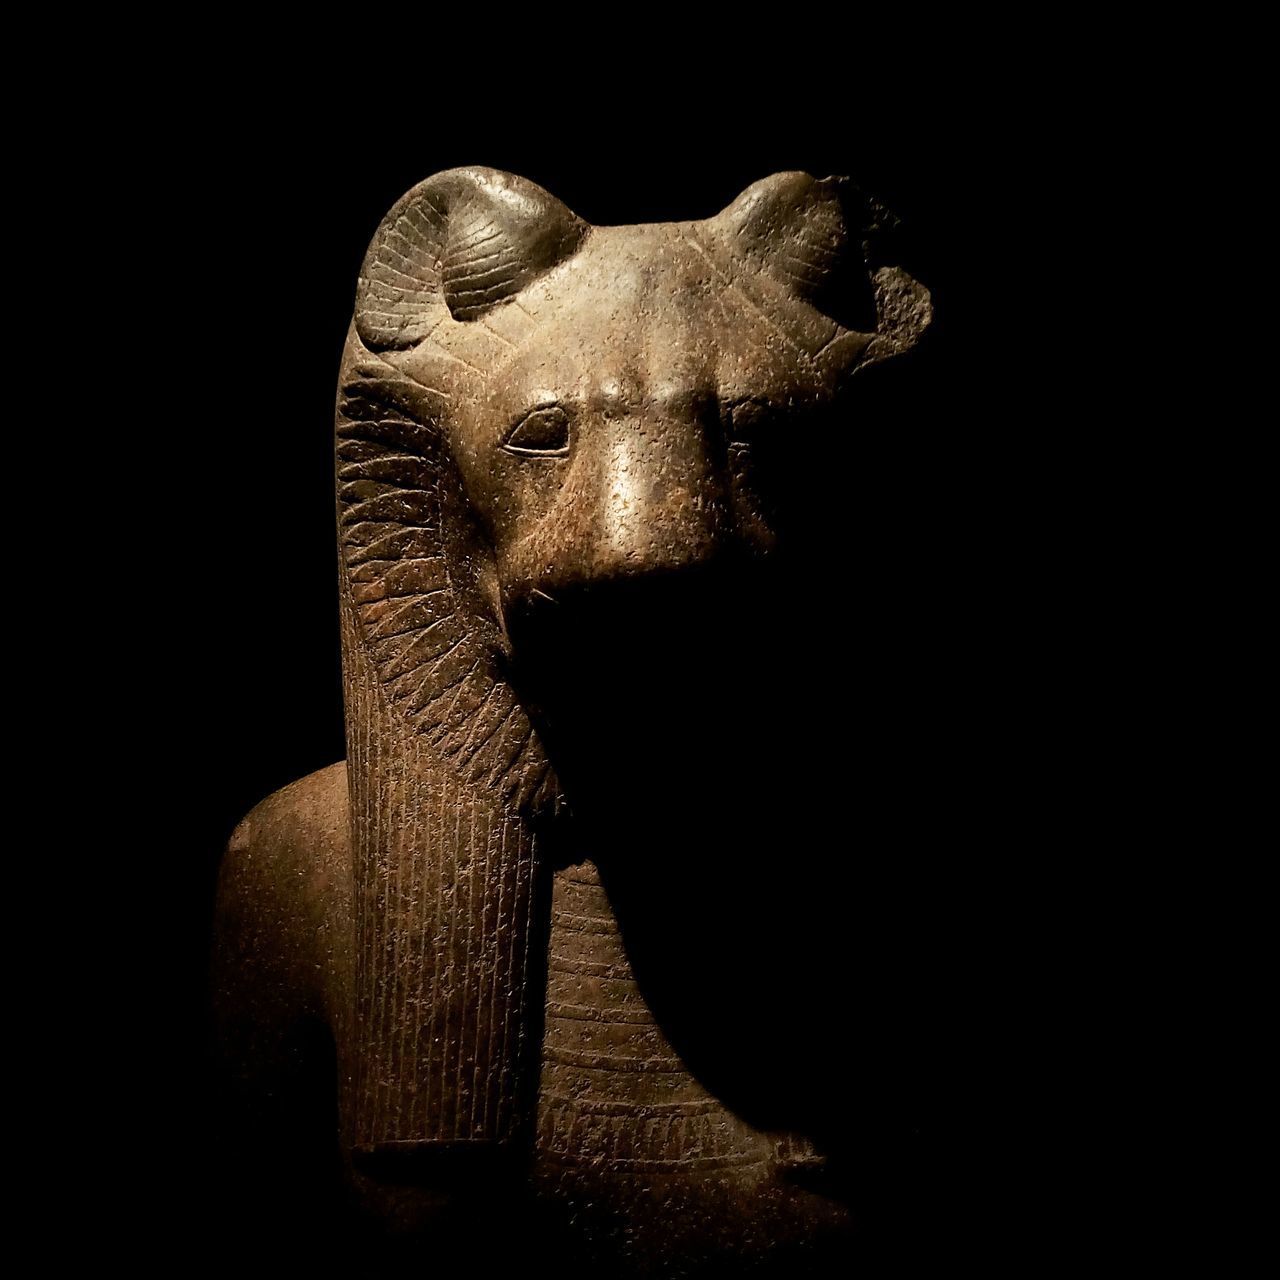 CLOSE-UP OF ELEPHANT IN BLACK BACKGROUND